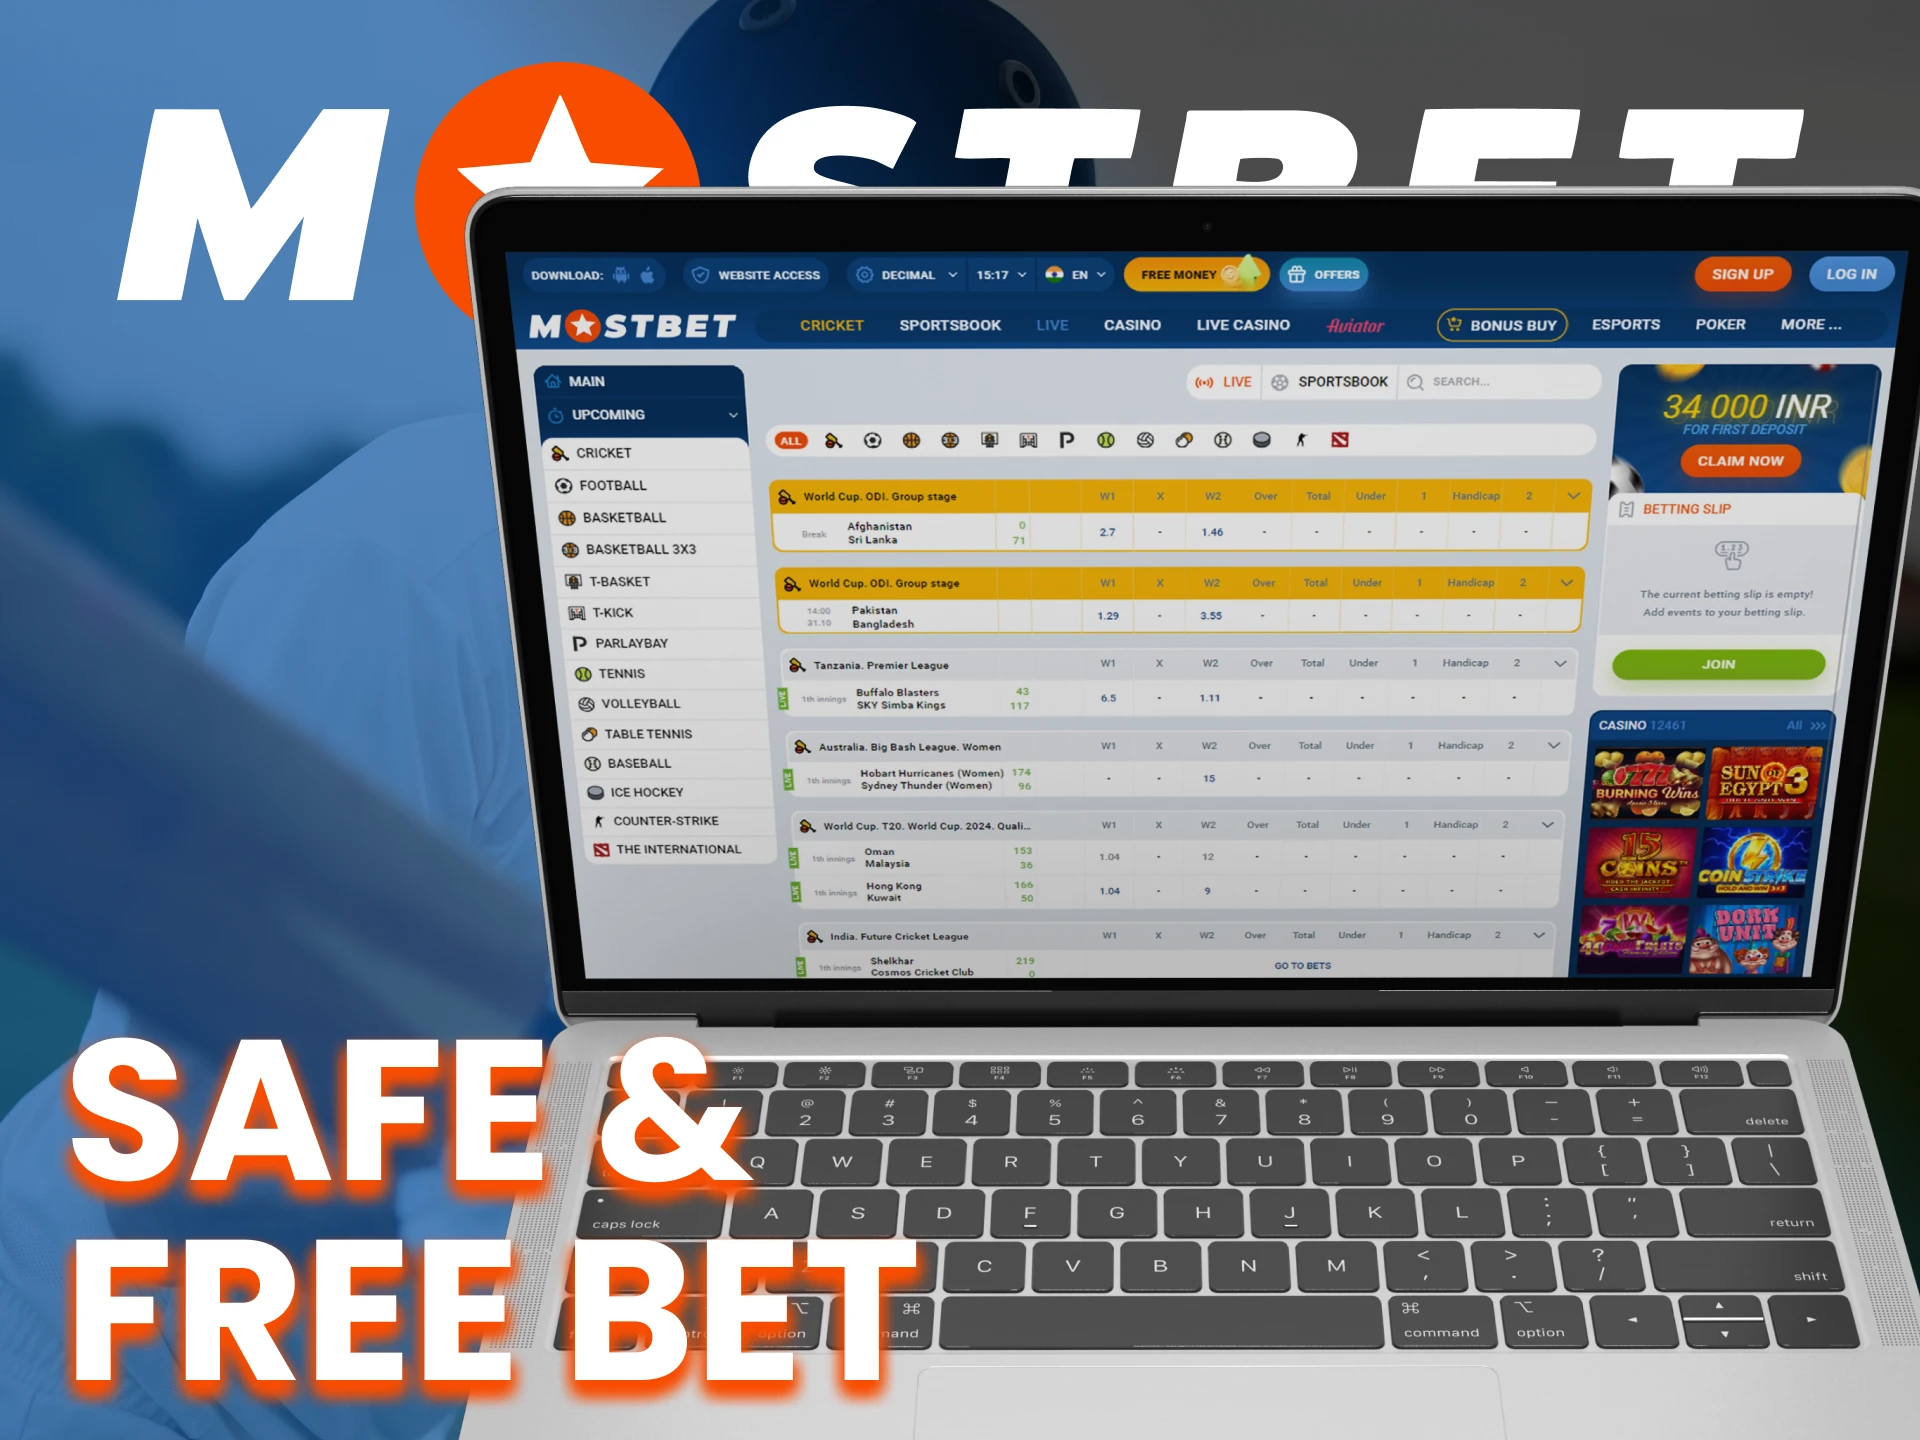 At Mostbet, get a special bonus and make safe and free bets.